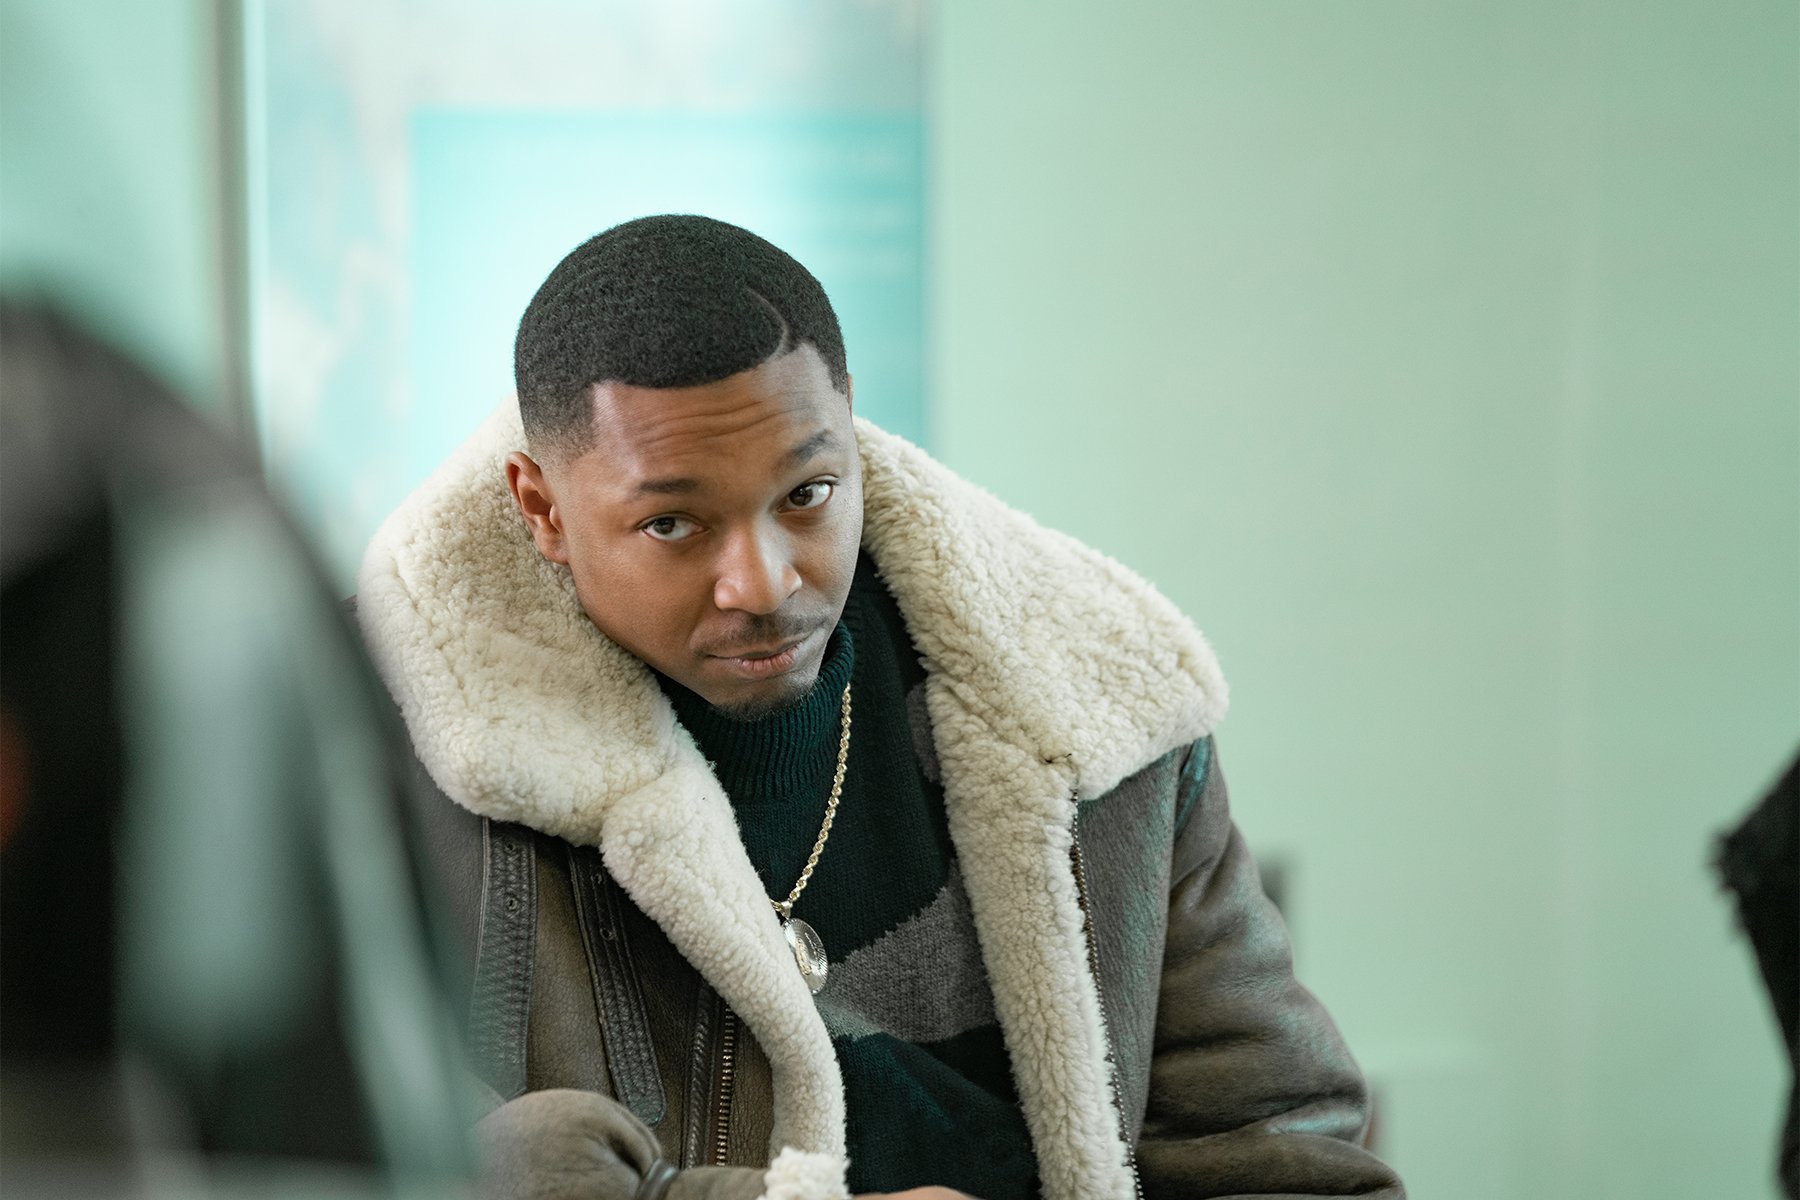 Malcolm Mays wearing a coat and looking off to the side as Lou Lou in 'Power Book III: Raising Kanan'